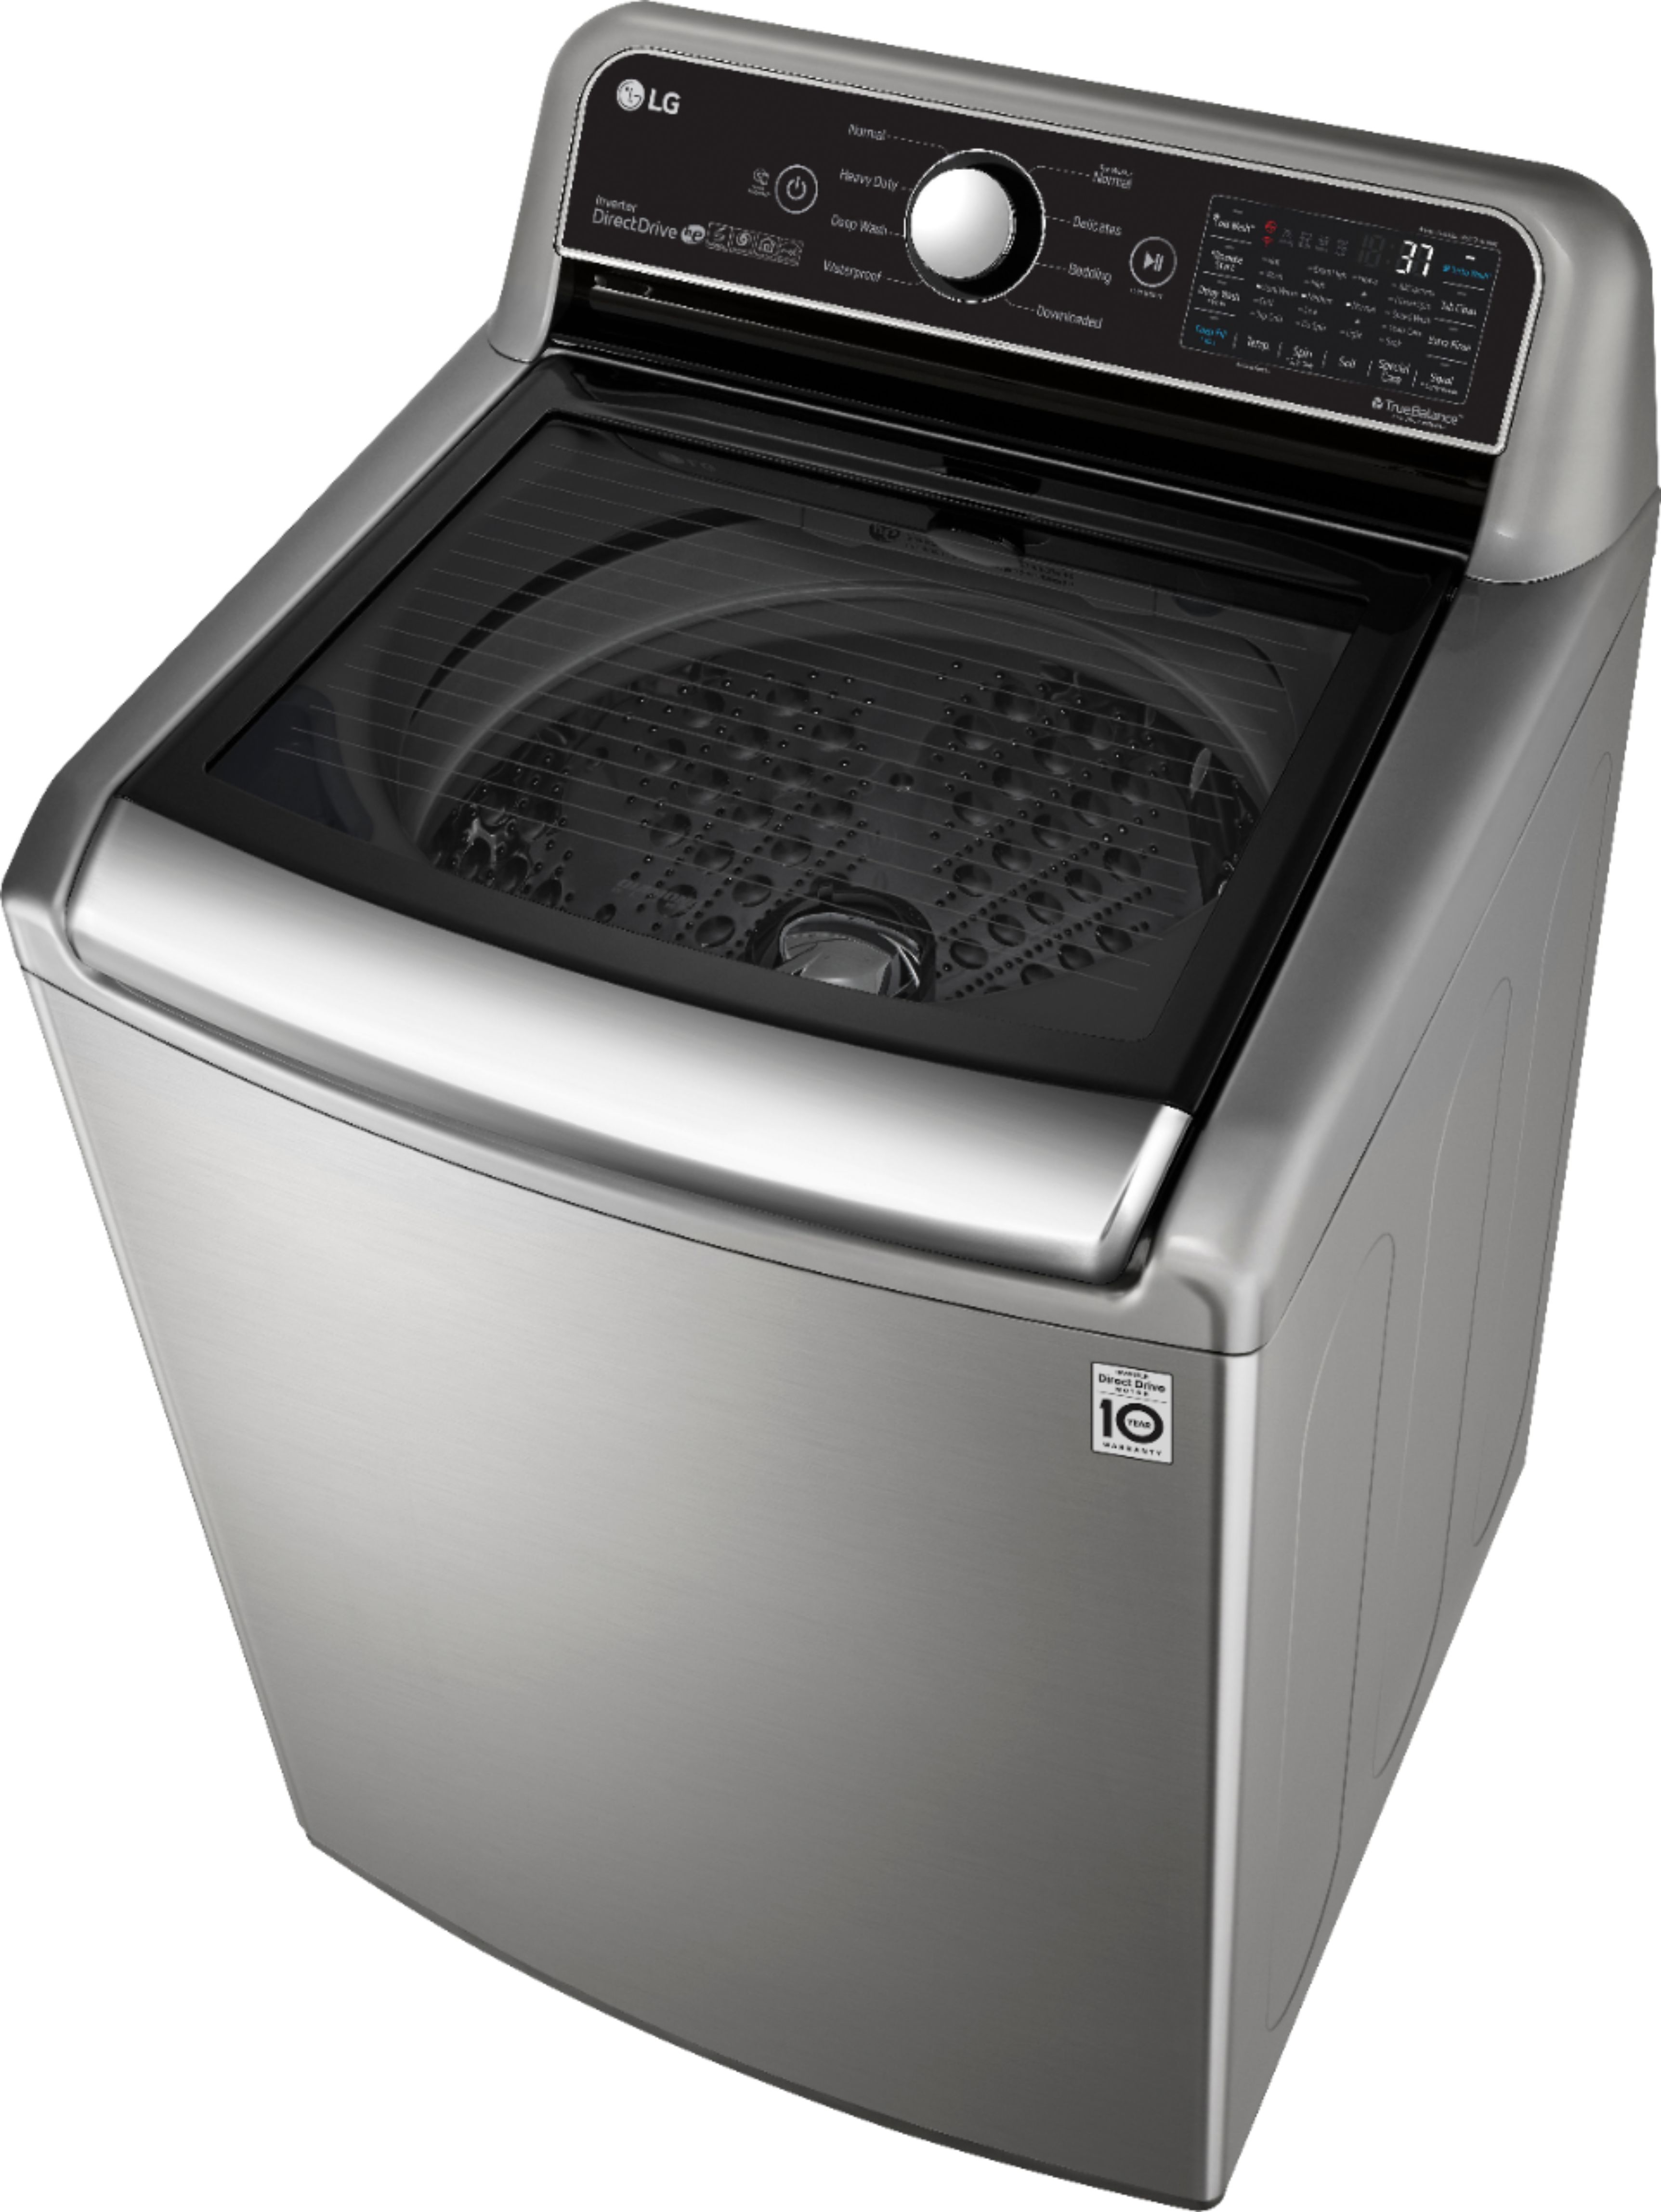 LG 4.8 Cu. Ft. HighEfficiency Top Load Washer with 4Way Agitator